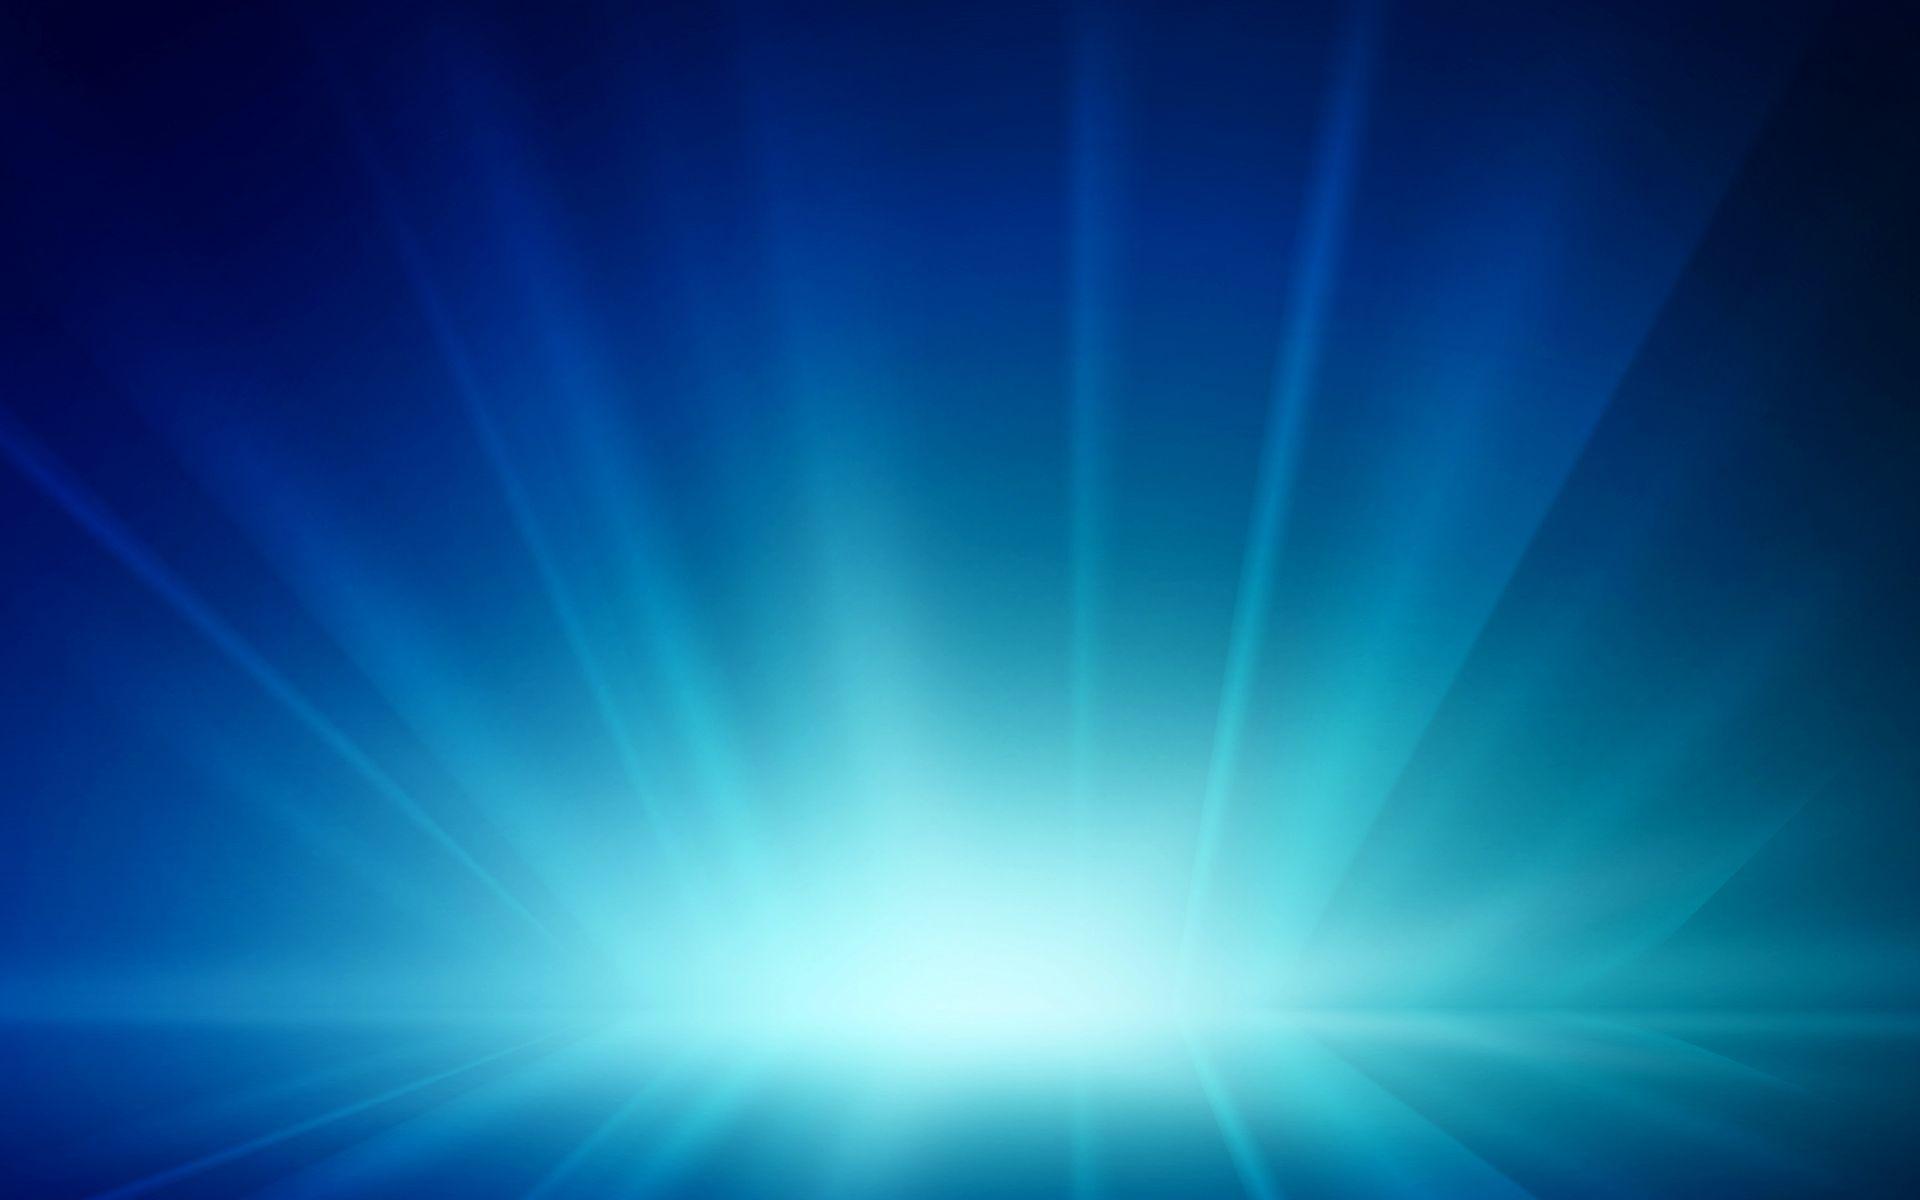 33+ Splendid Sky Blue Abstract Wallpaper Free To Download